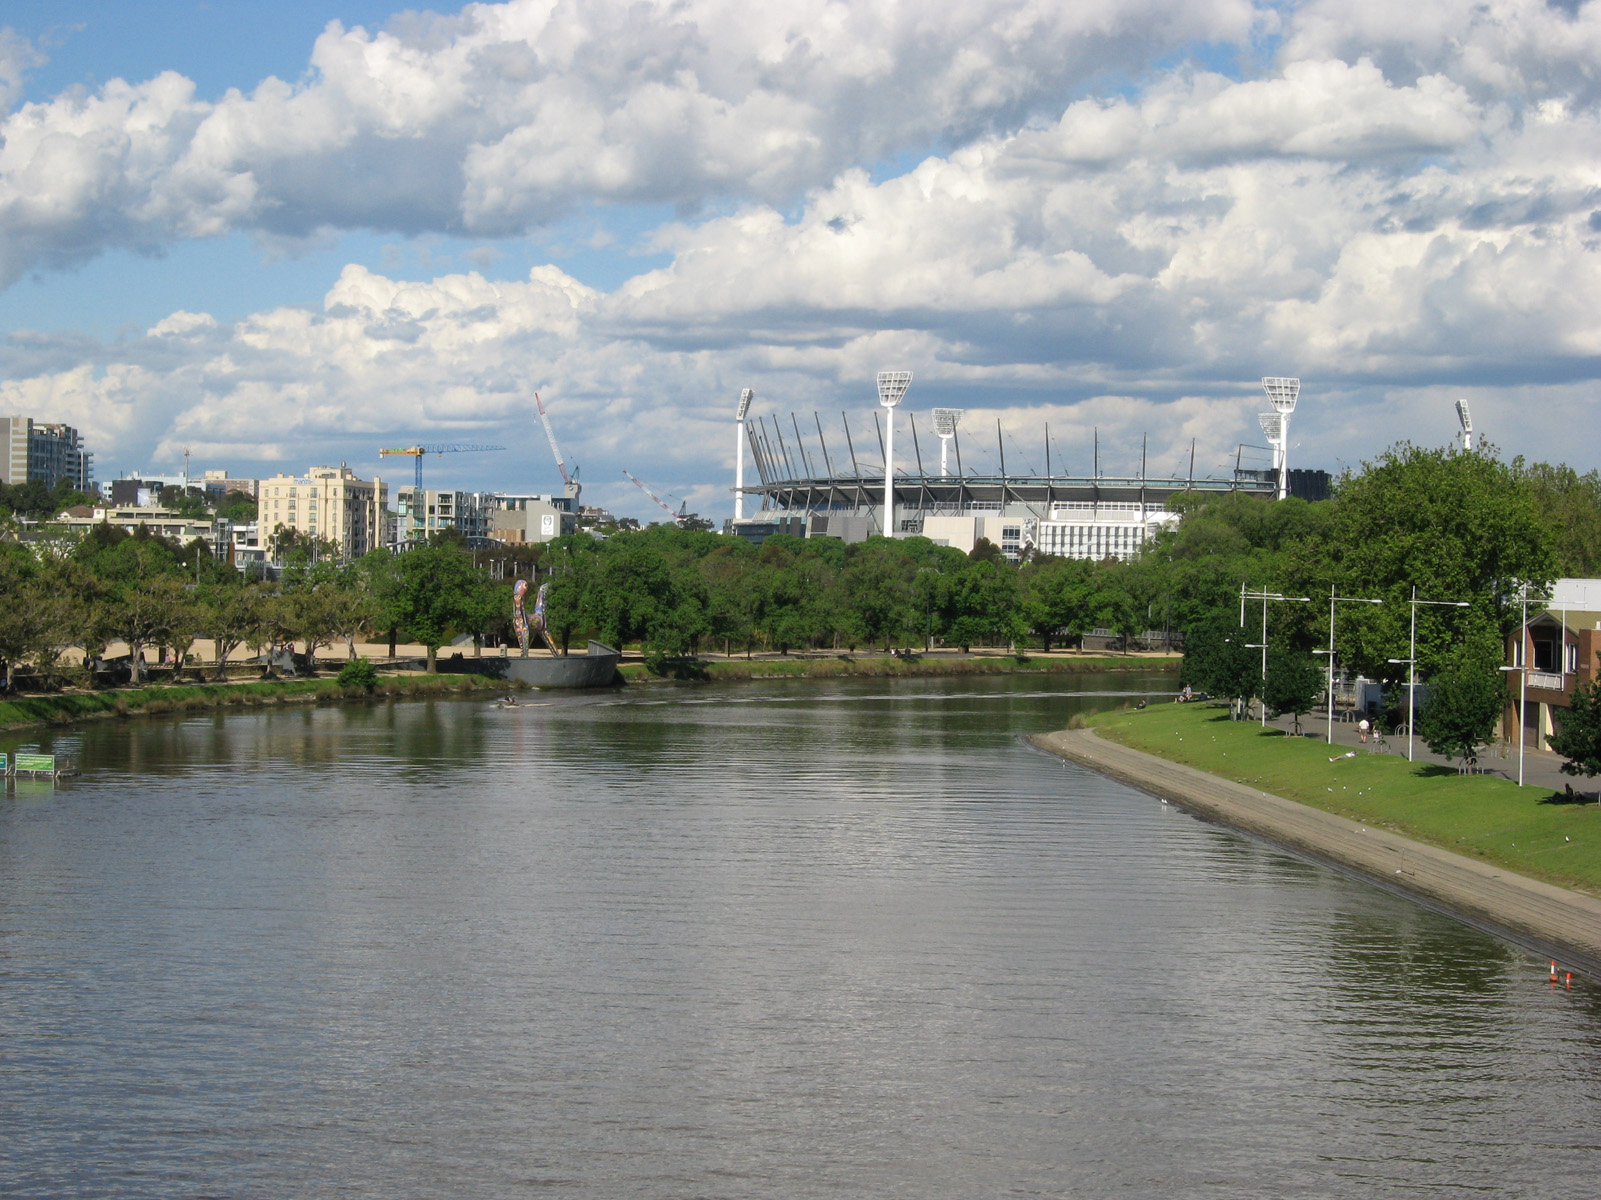 Australian Open tennis courts by the Yarra River